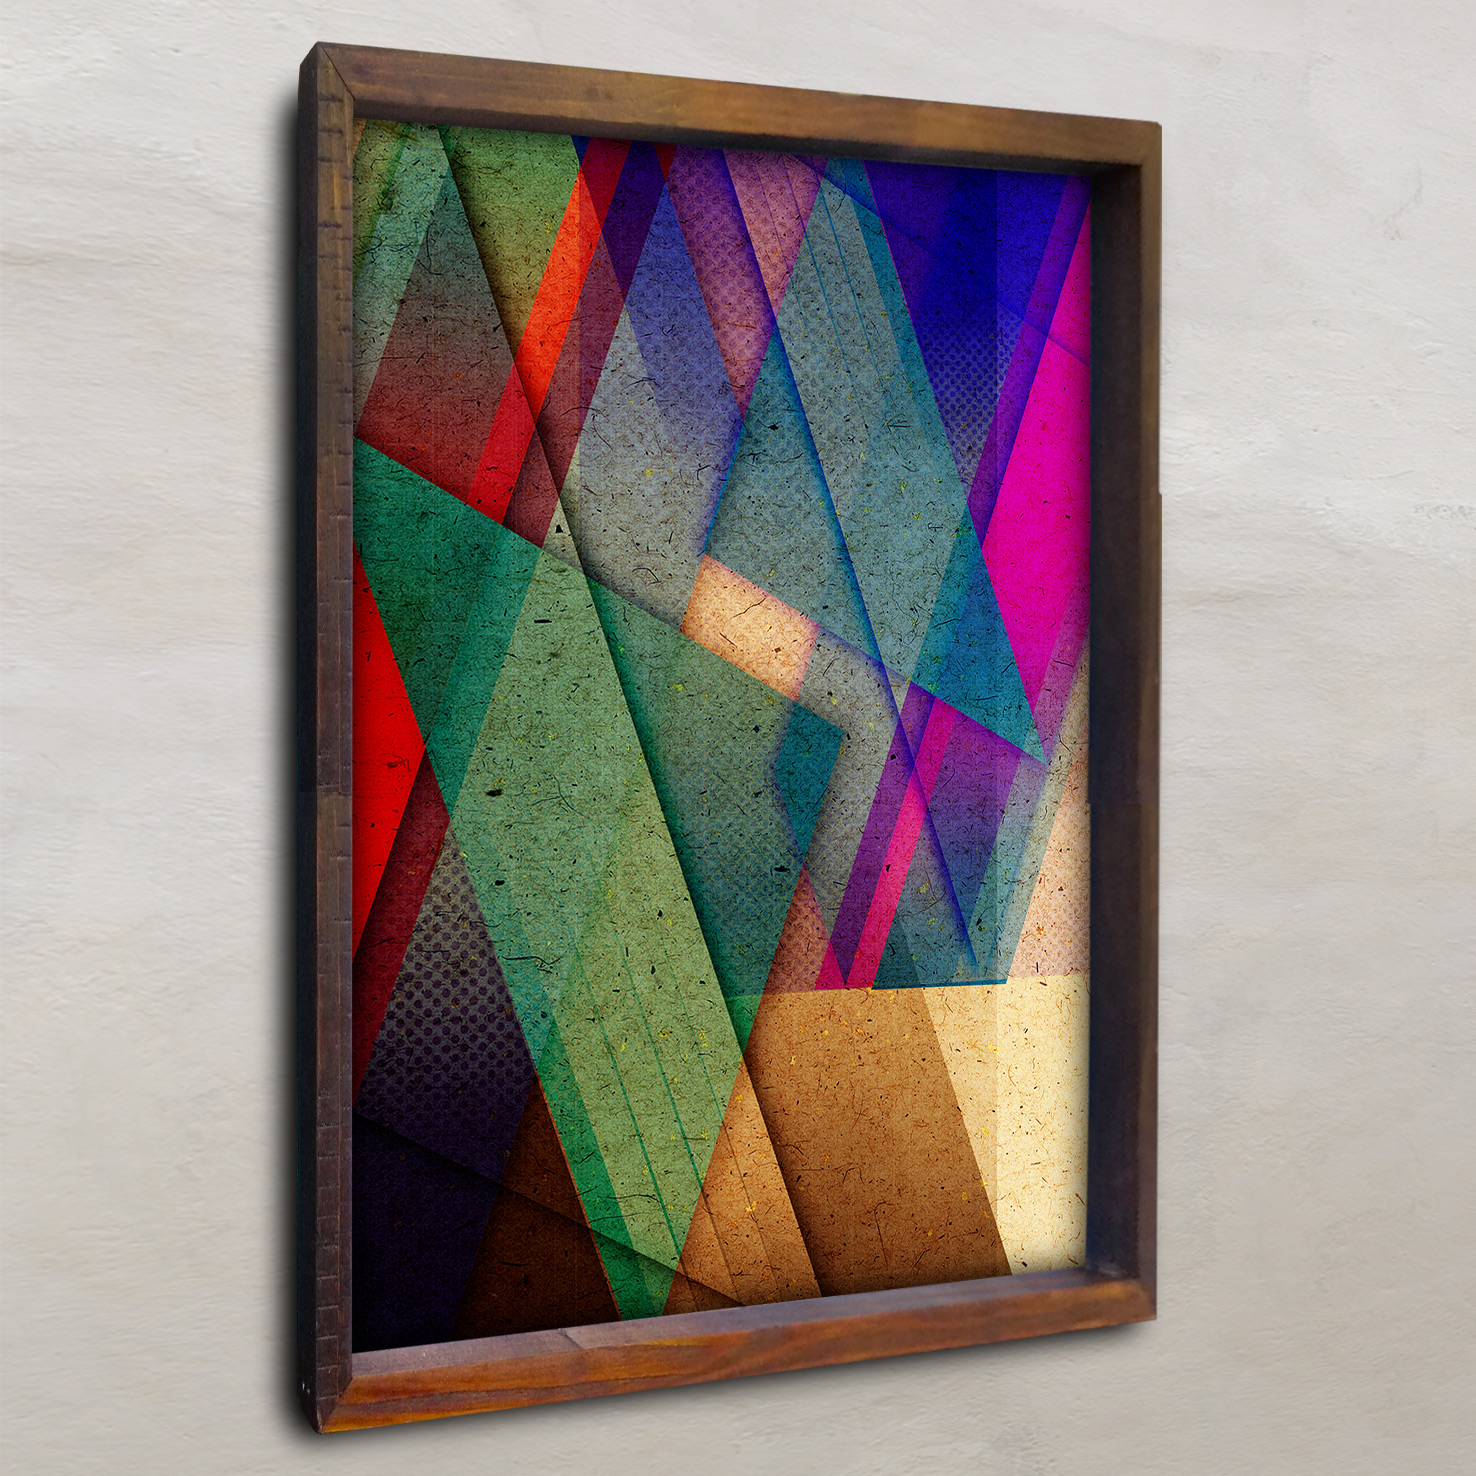 Solid Wooden Frame Painting 50x70